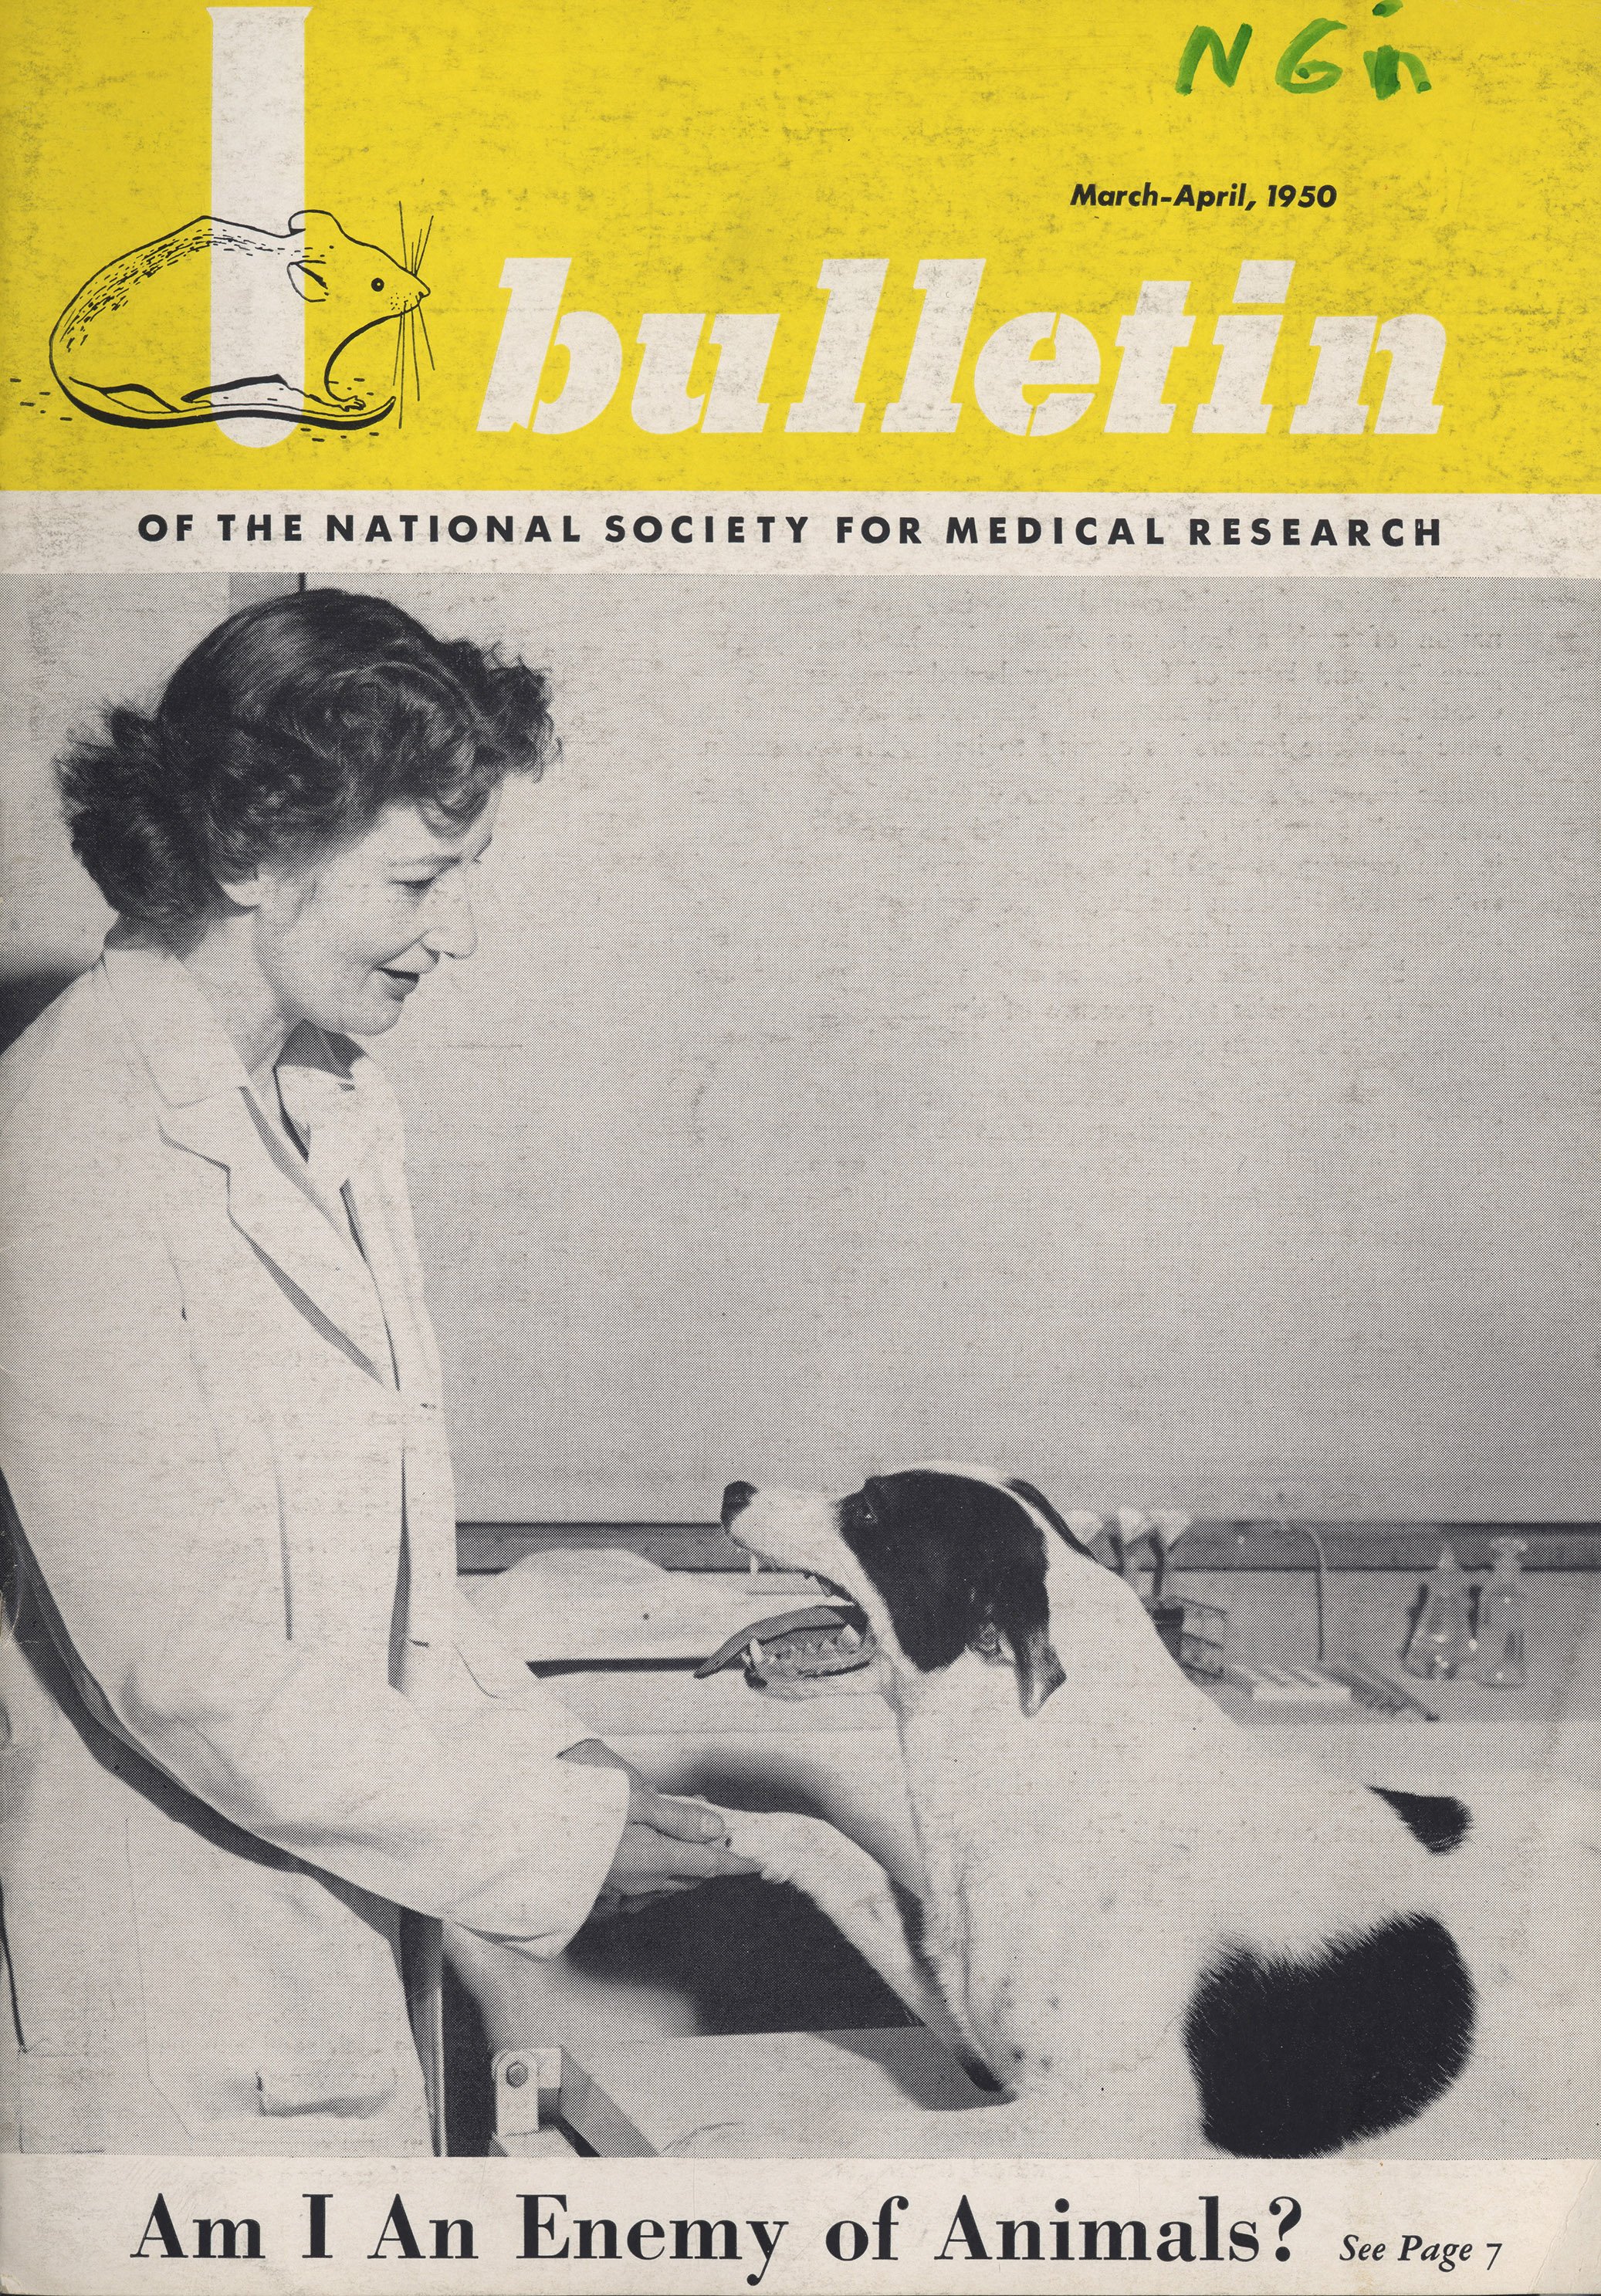 Image of woman in white coat with dog on cover of the Bulletin of the National Society for Medical Research